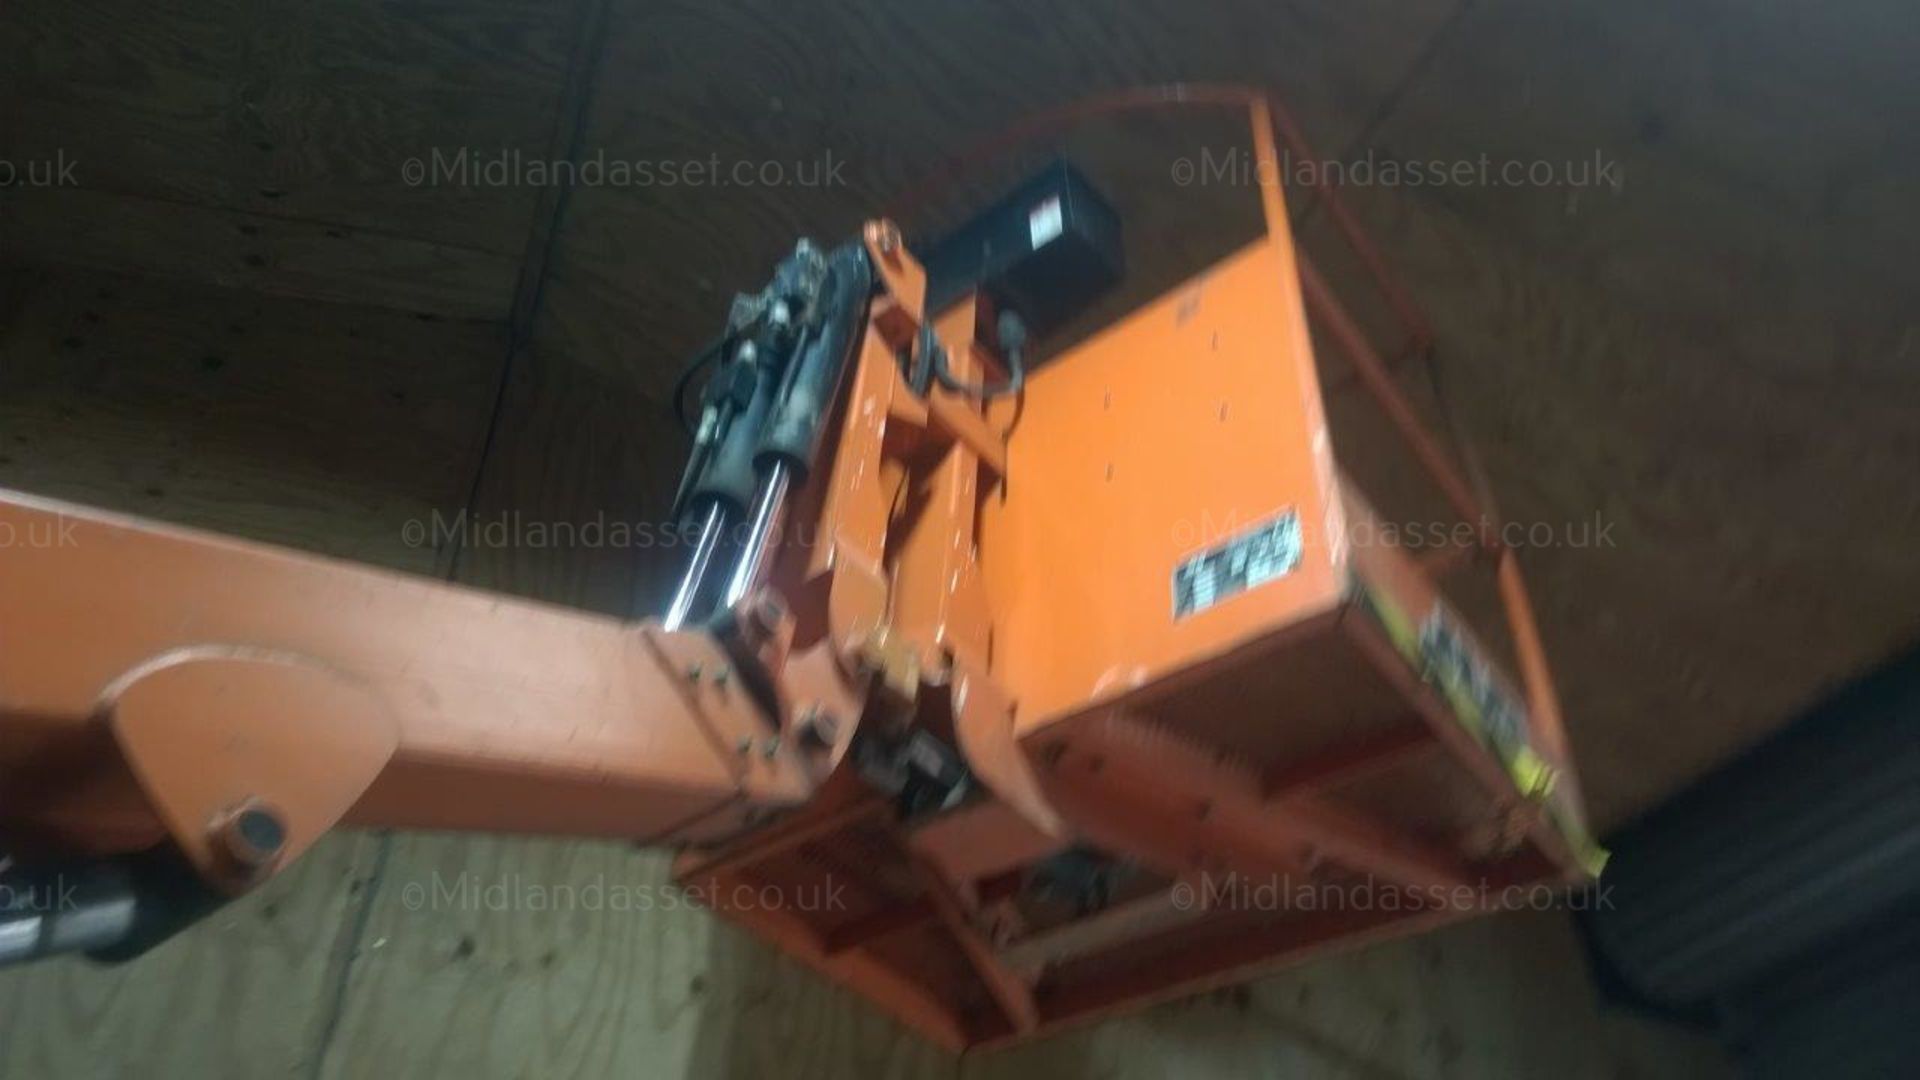 2005 TOUCAN 1210 ELECTRIC BOOM LIFT - Image 6 of 8